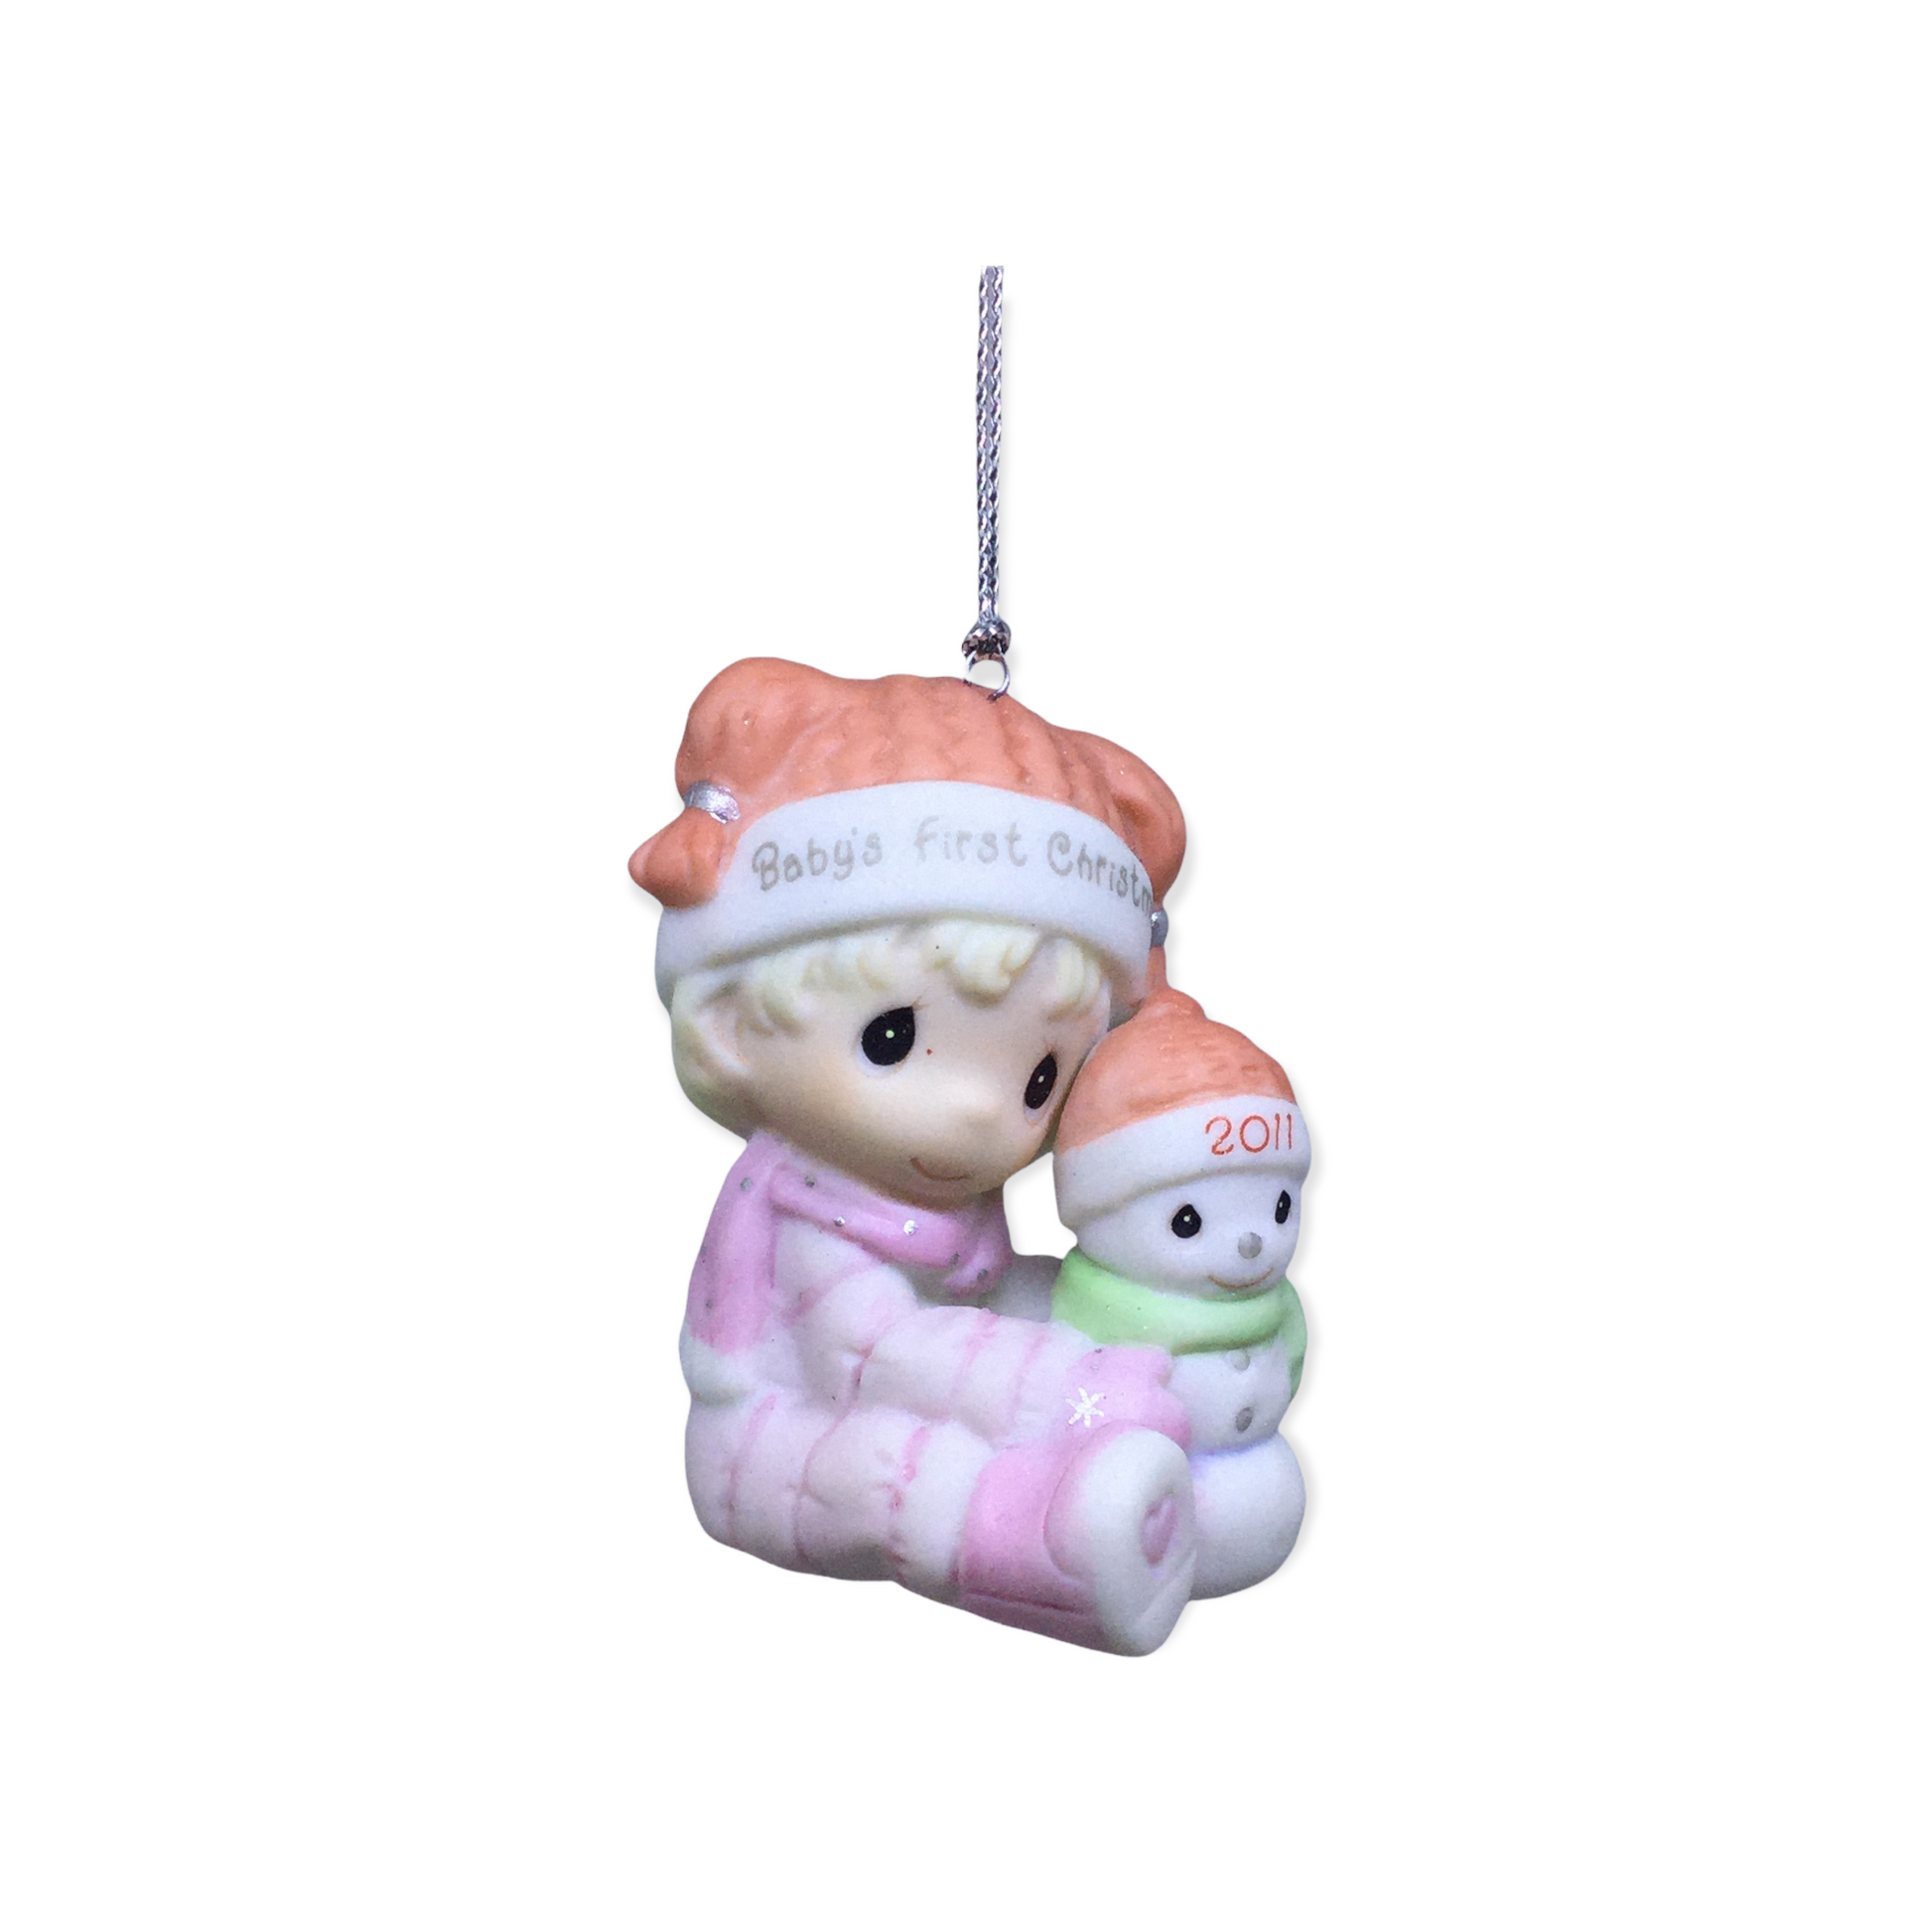 Baby's First Christmas 2011 (Girl) - Precious Moment Ornament